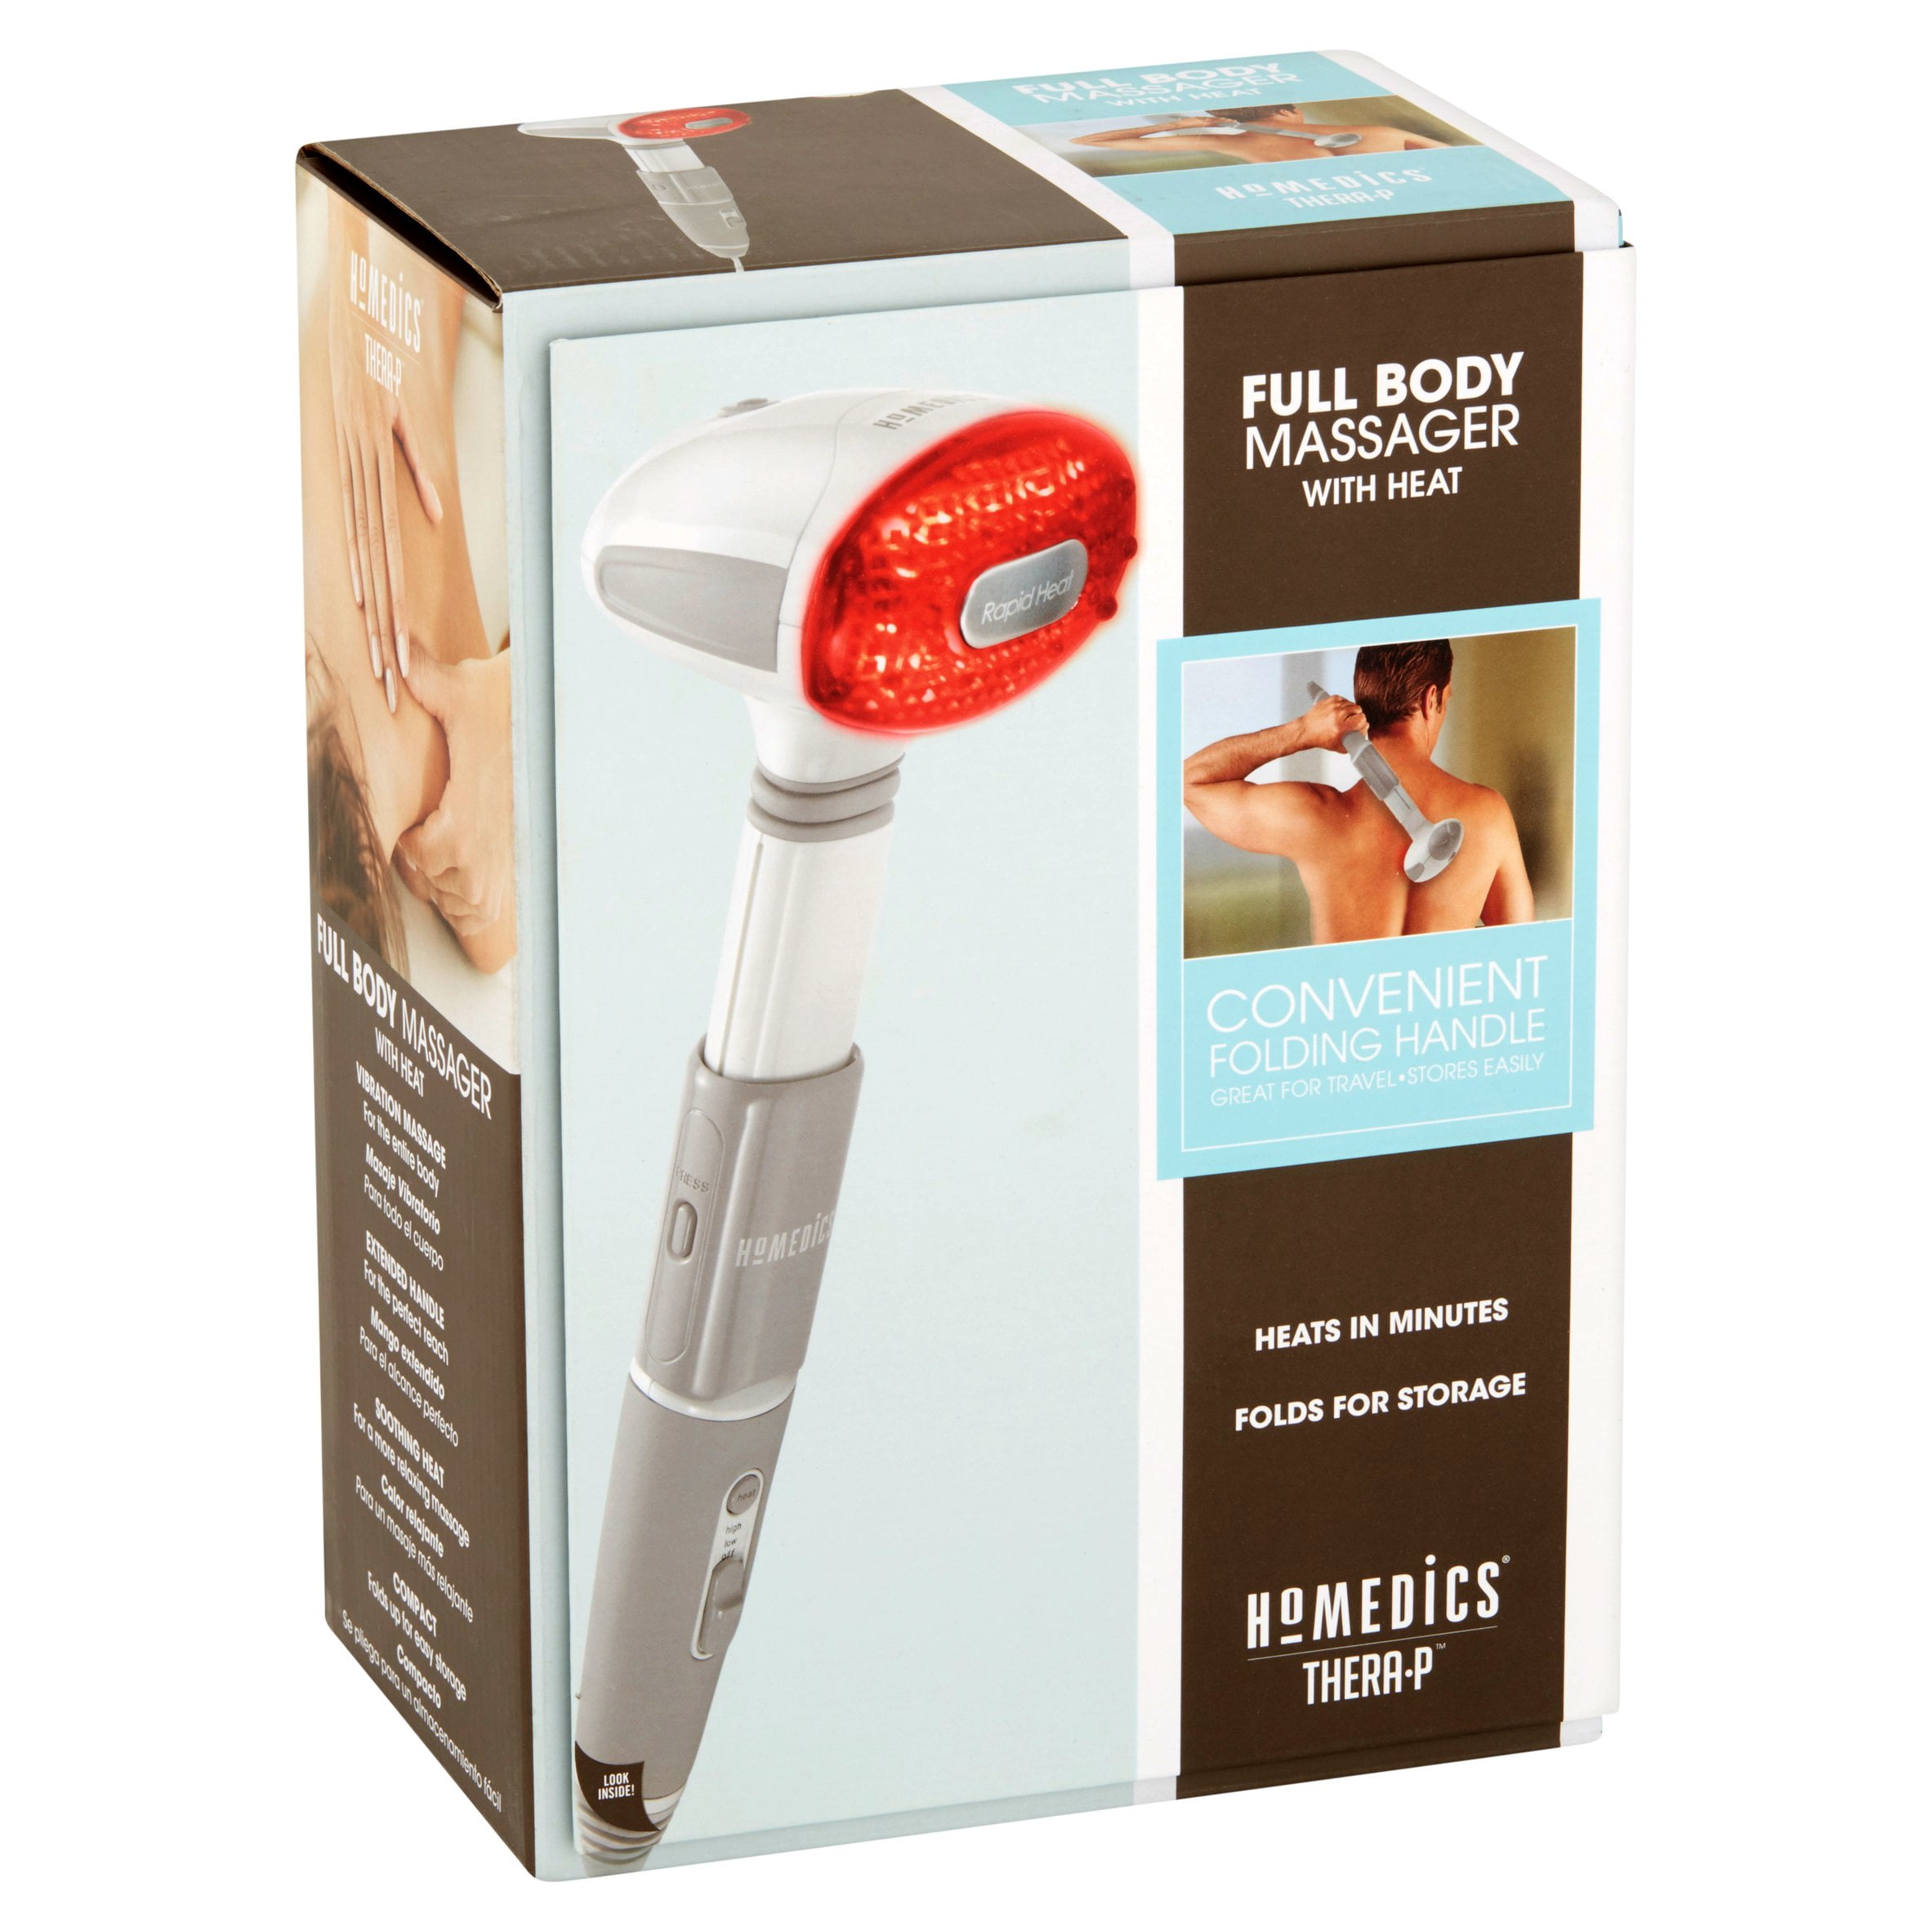 Total Body Massager – AnythingHealthy